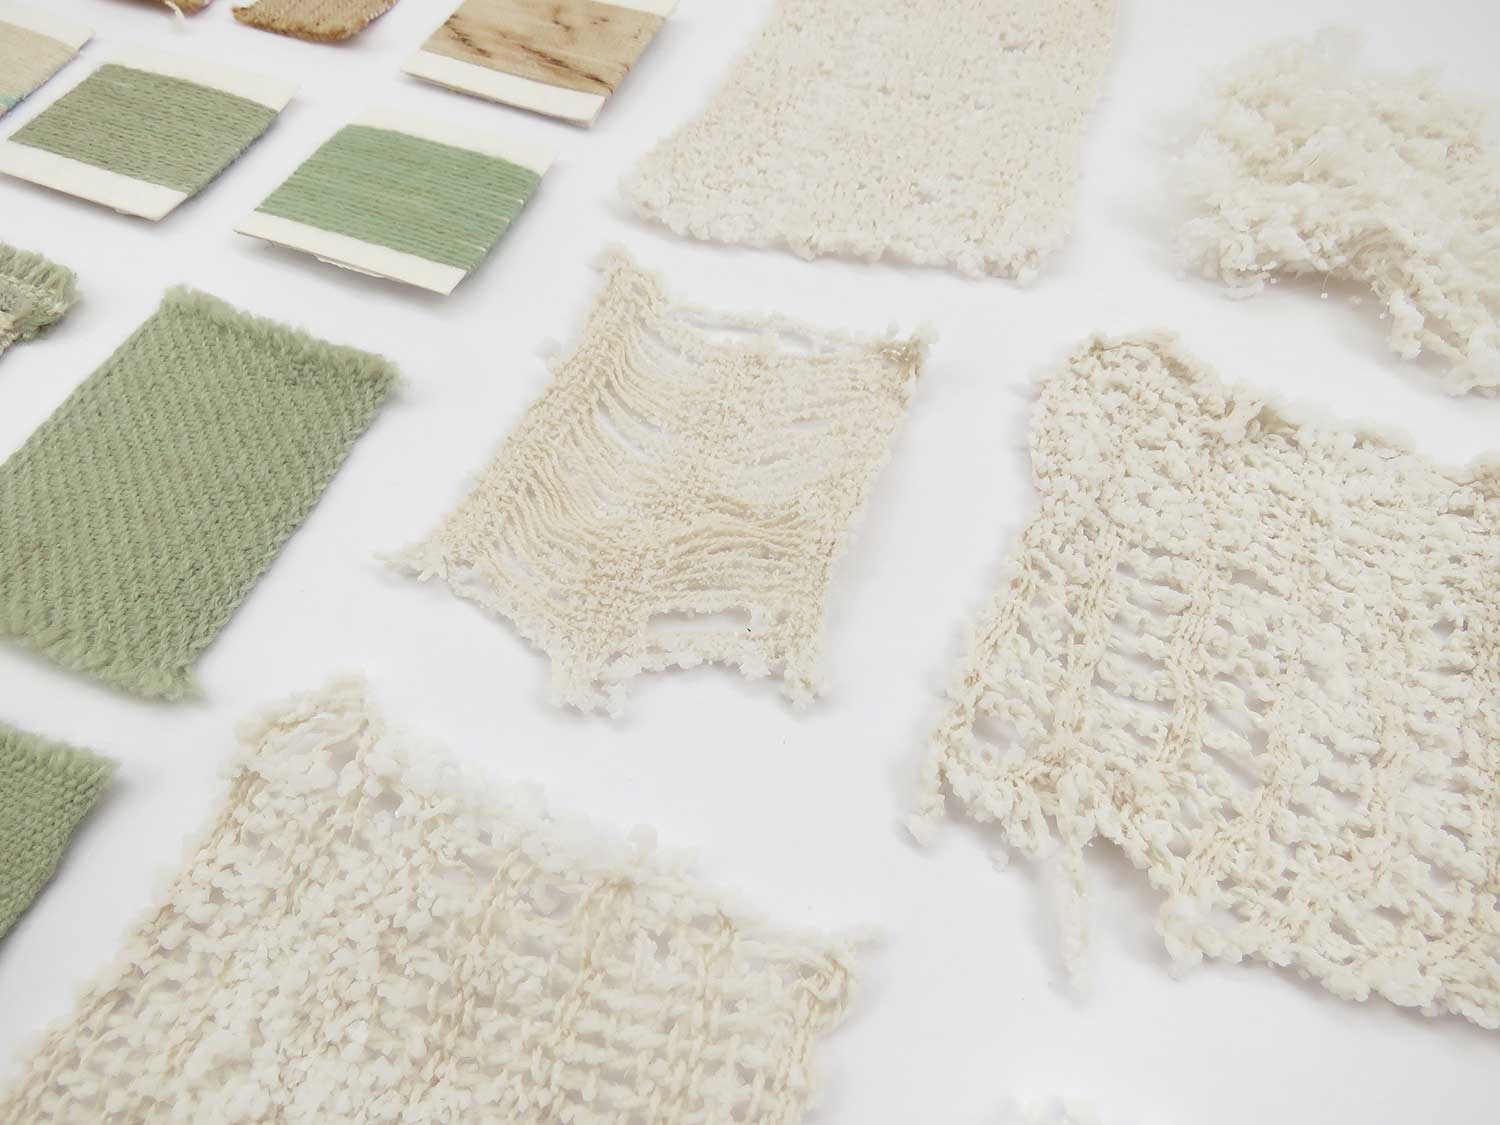 SeaCell is a textile made from seaweed